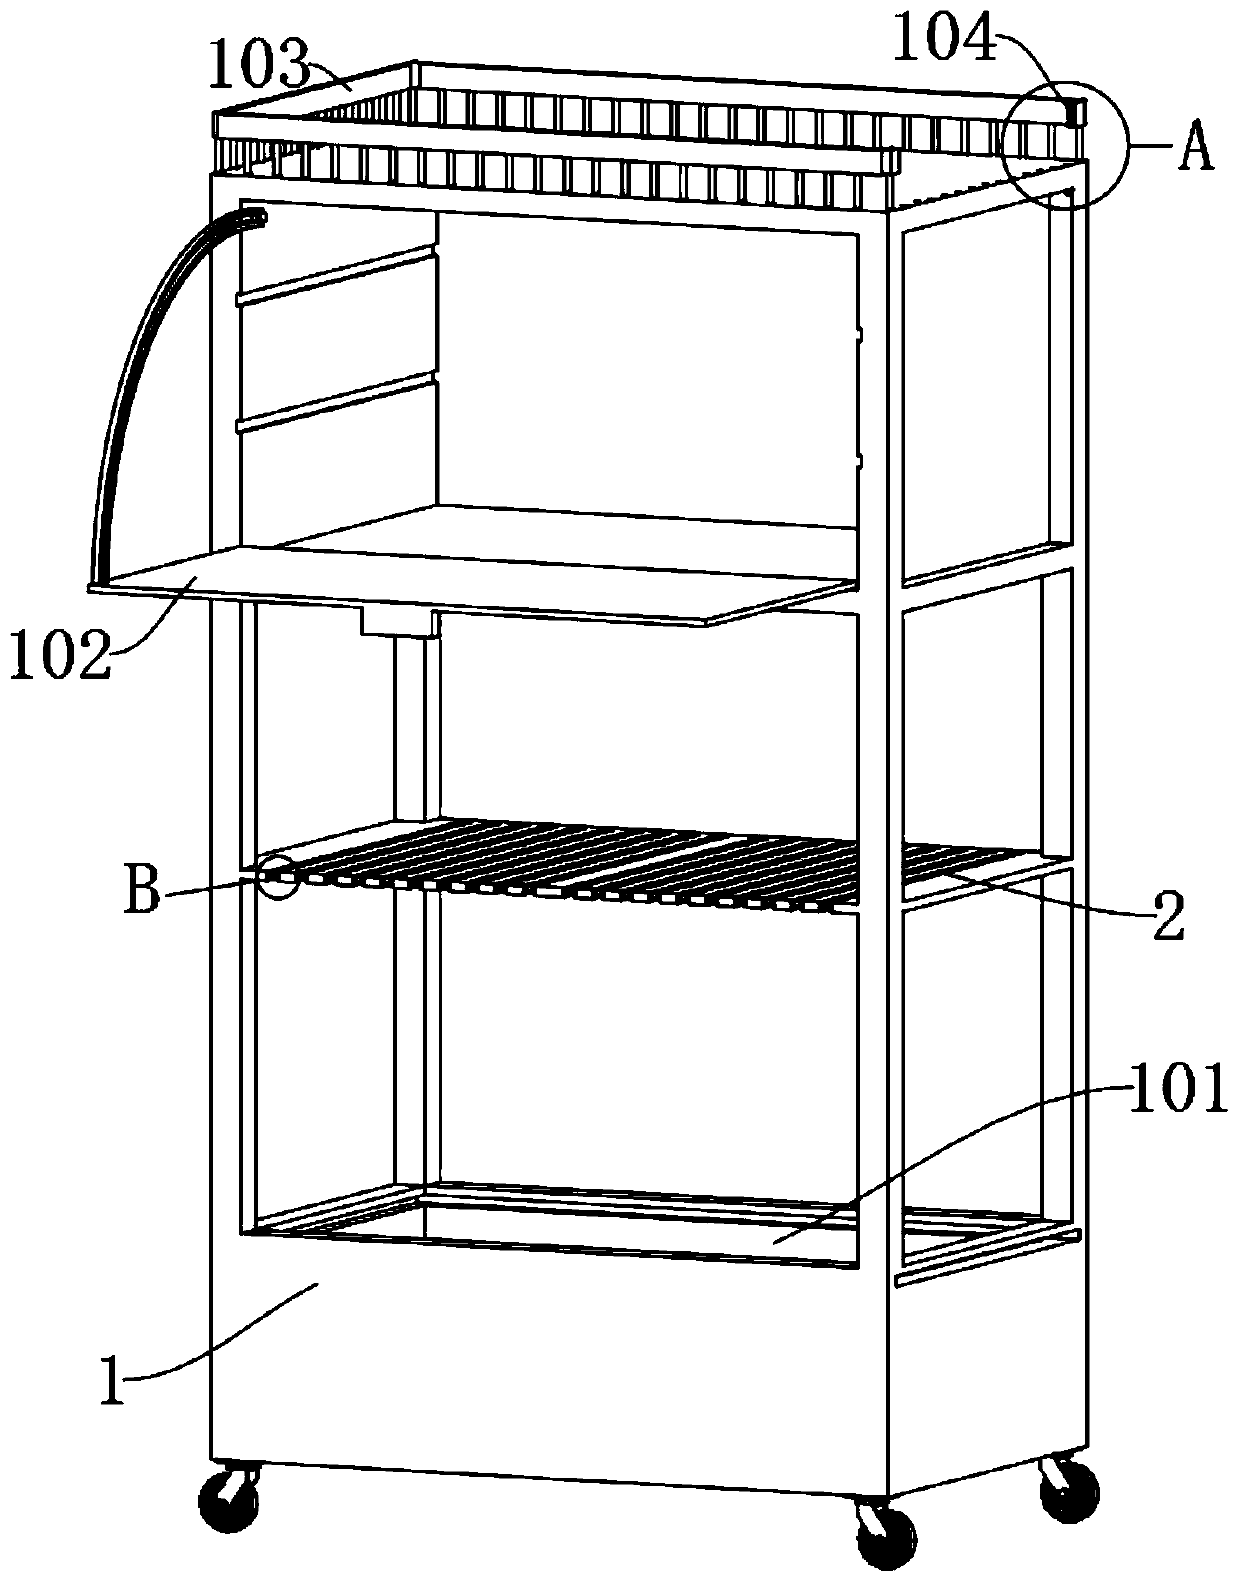 Medical instrument containing device with sterilization and disinfection functions